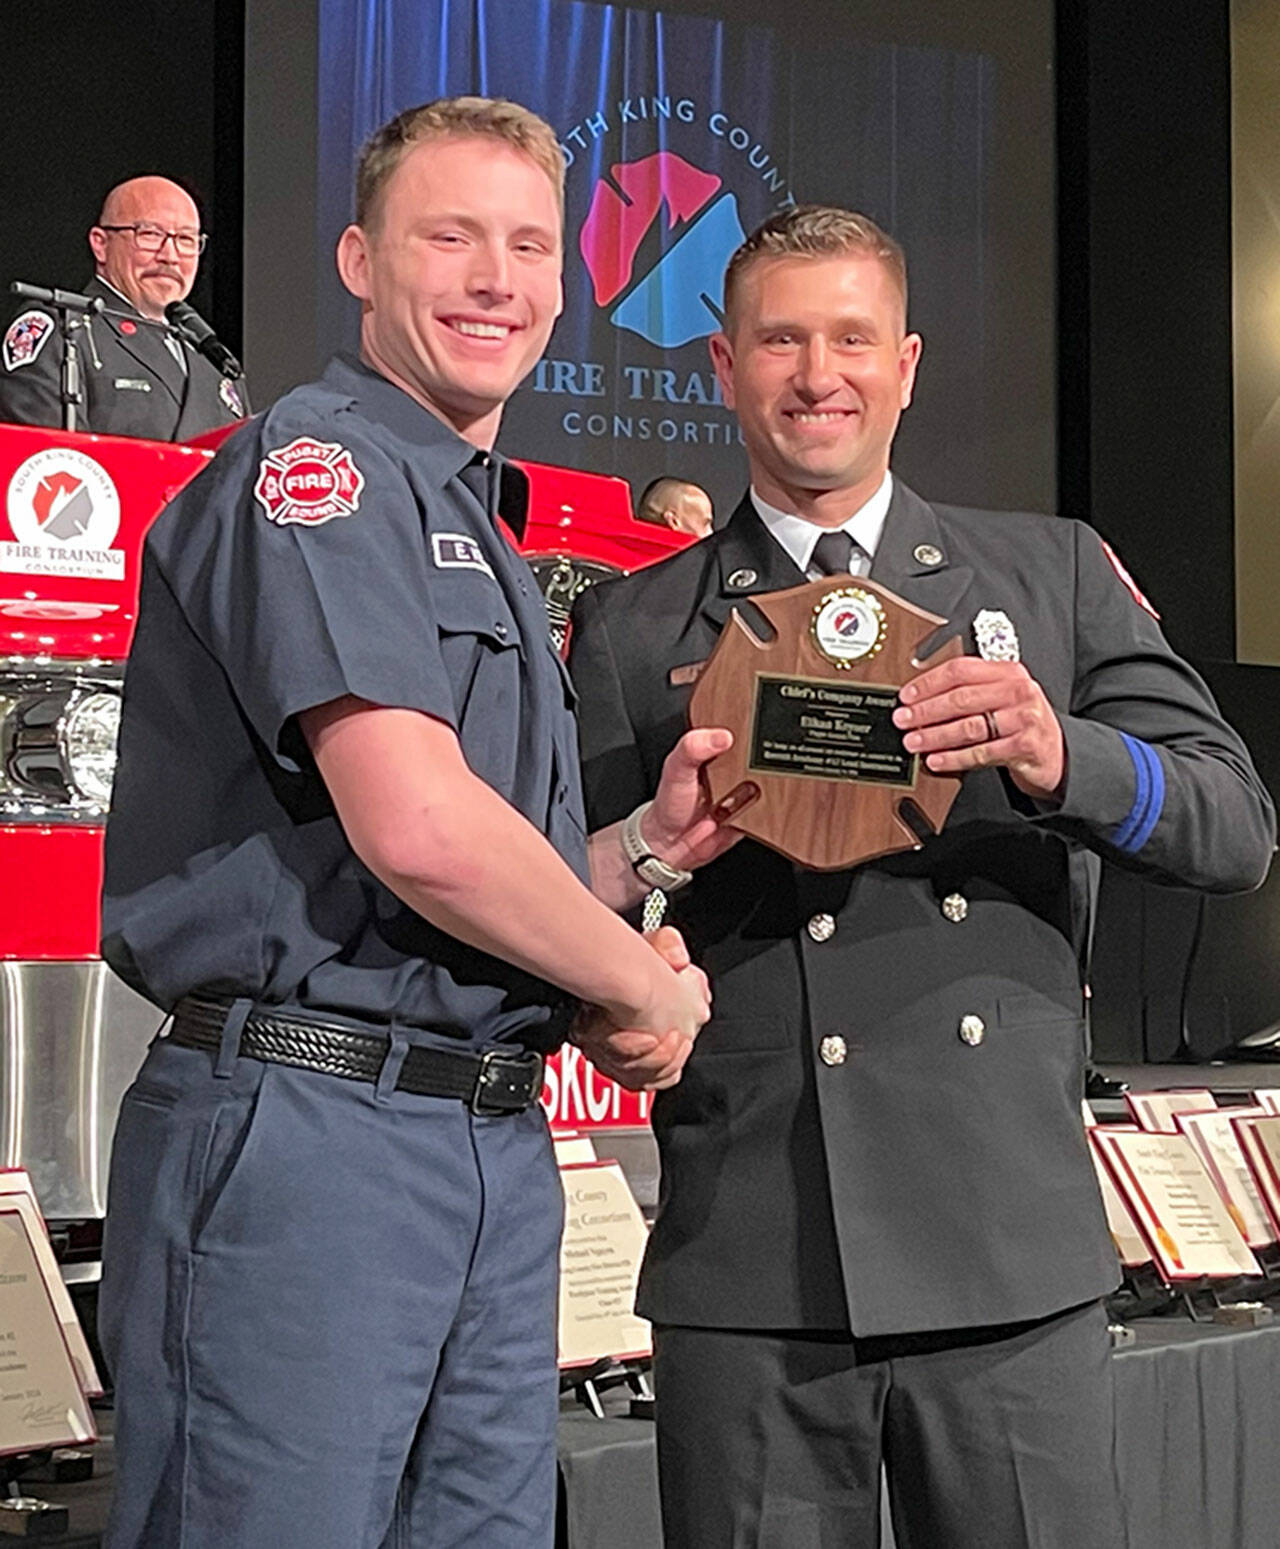 Ethan Keyser received a Chief's company award for his attitude, effort, performance and teamwork during the recruit academy. COURTESY PHOTO, Puget Sound Fire